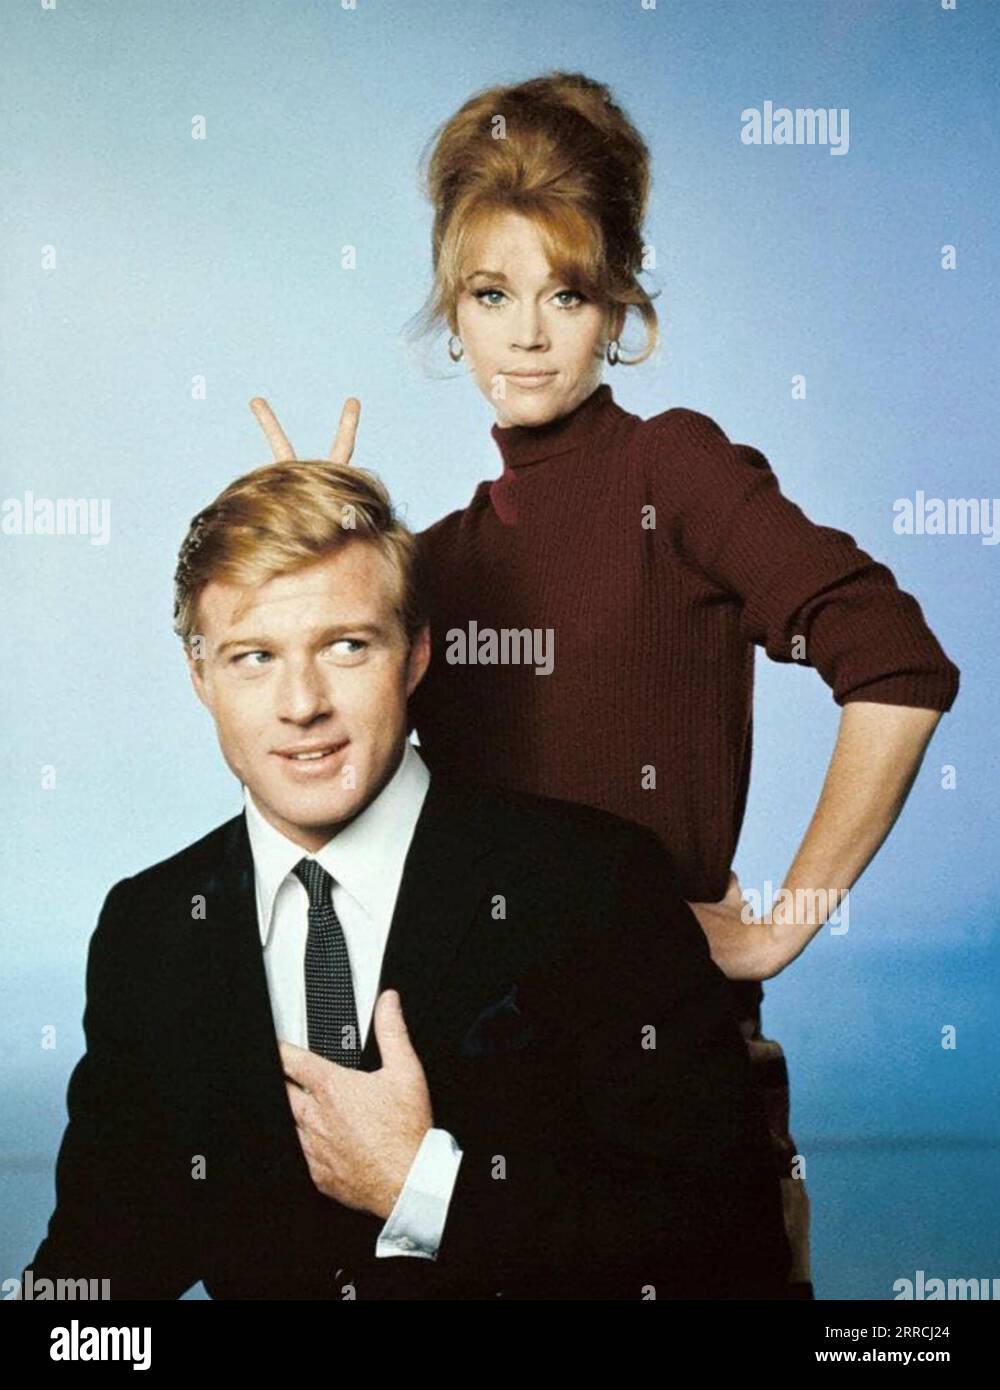 BAREFOOT IN THE PARK 1967 Paramount Pictures film with Robert Redford and Jane Fonda Stock Photo